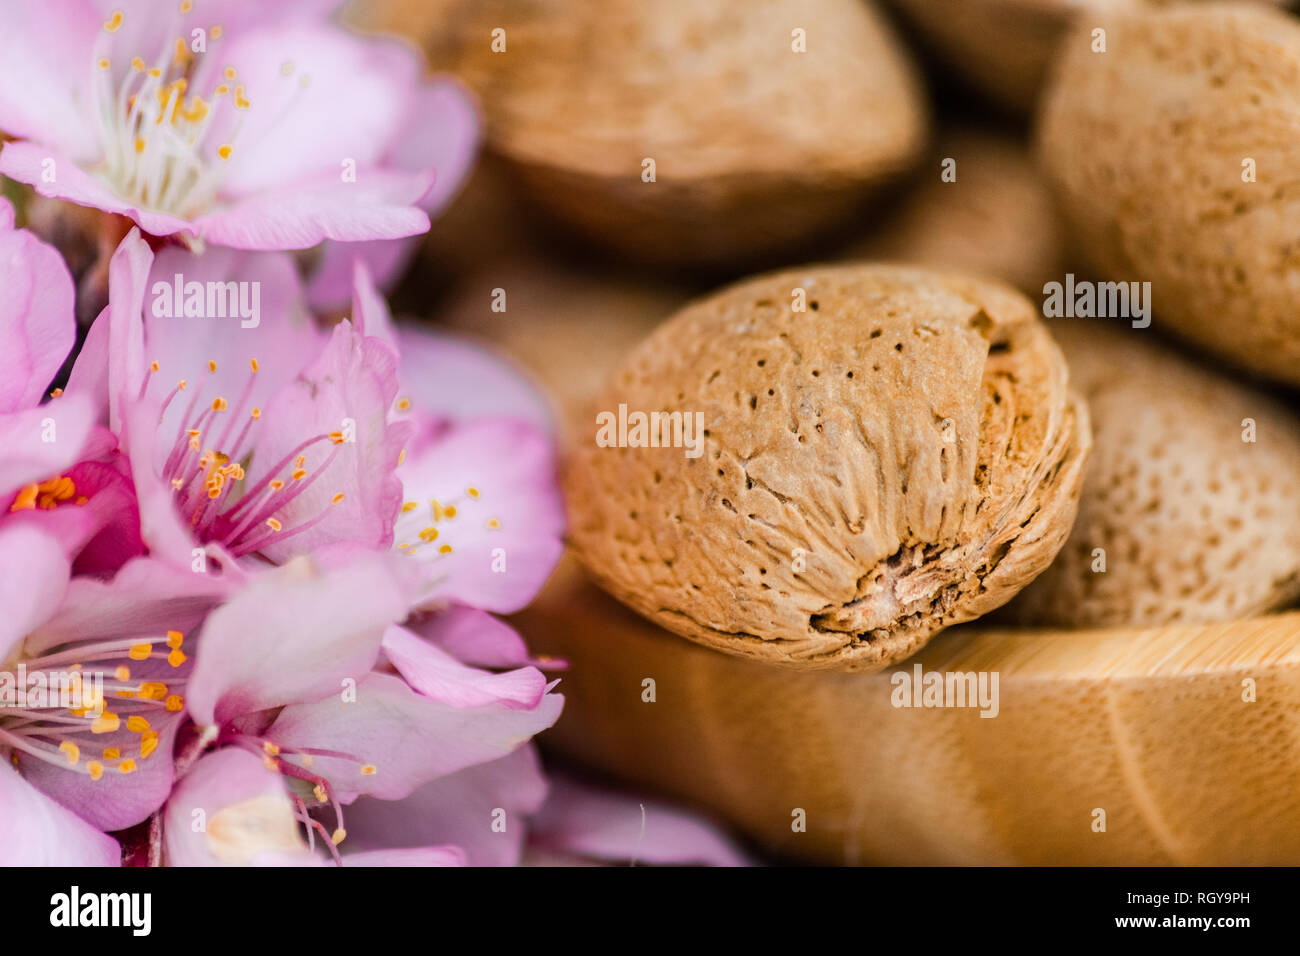 Almonds with shell in wooden bowl, and almond flowers blooming Stock Photo